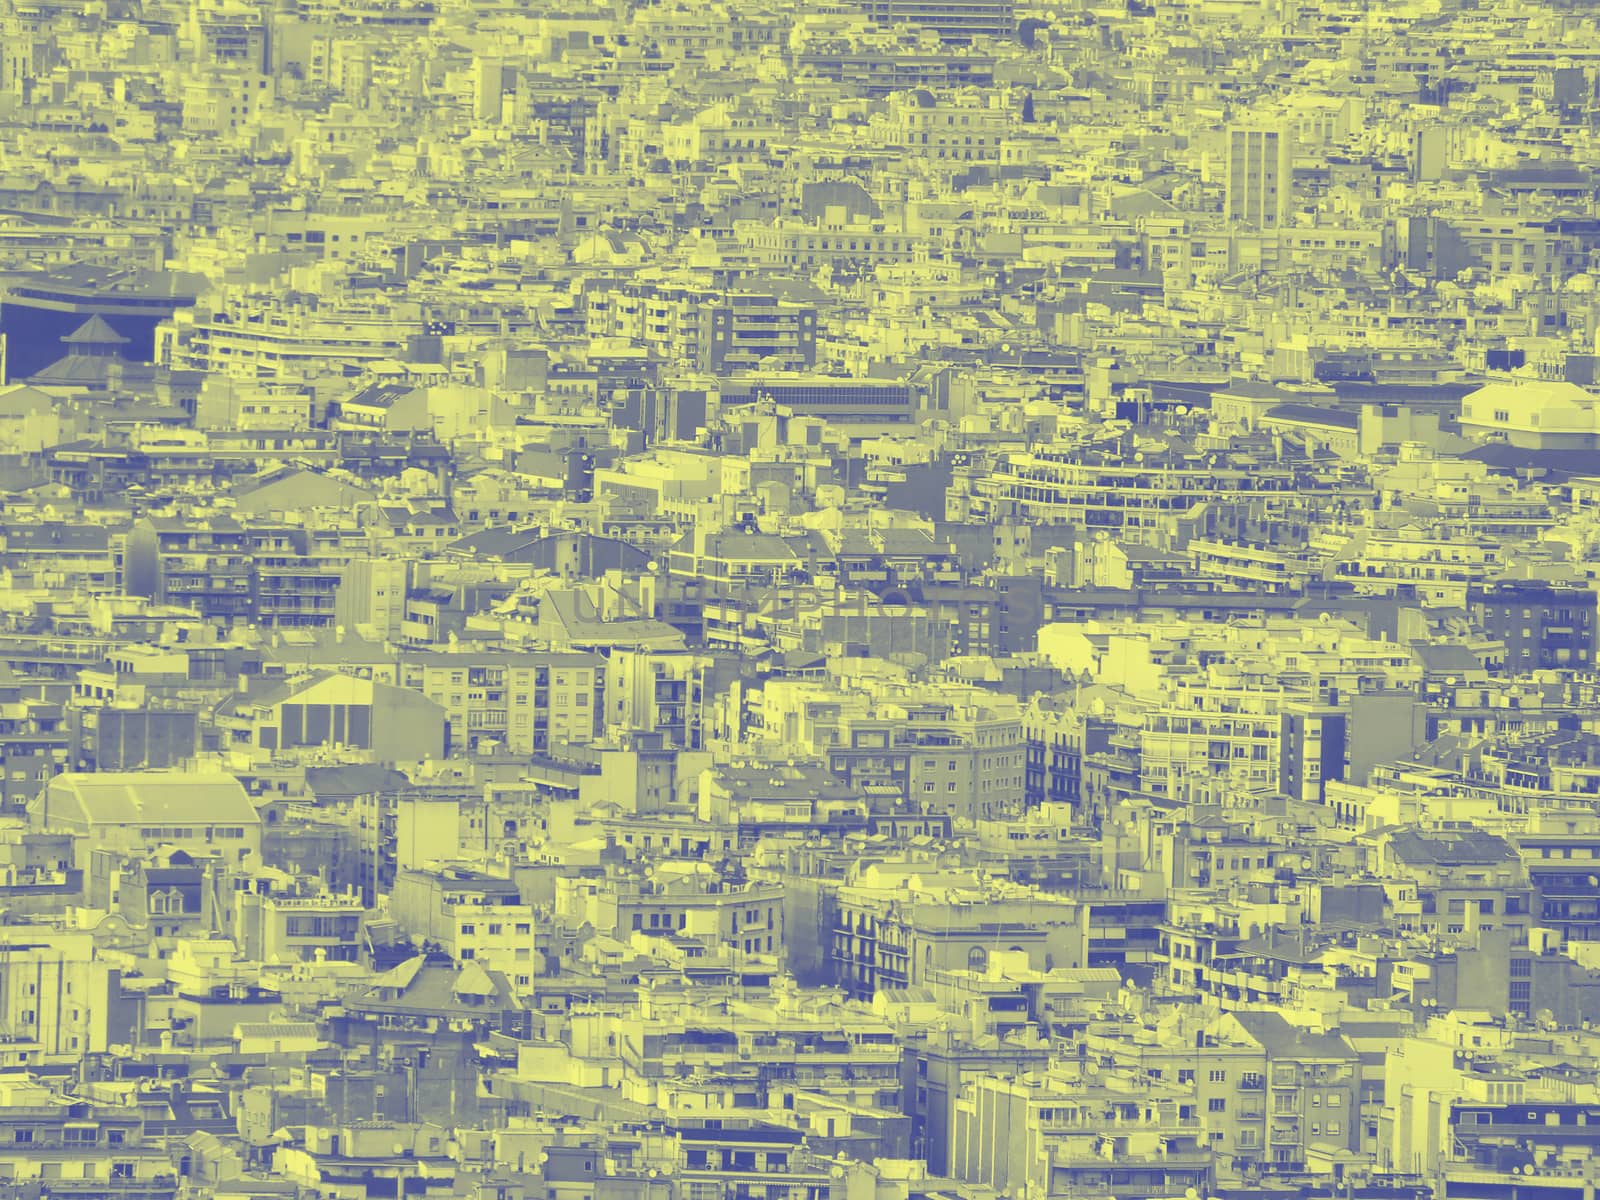 a blue and yellow duotone crowded urban cityscape background with hundreds of densely packed buildings